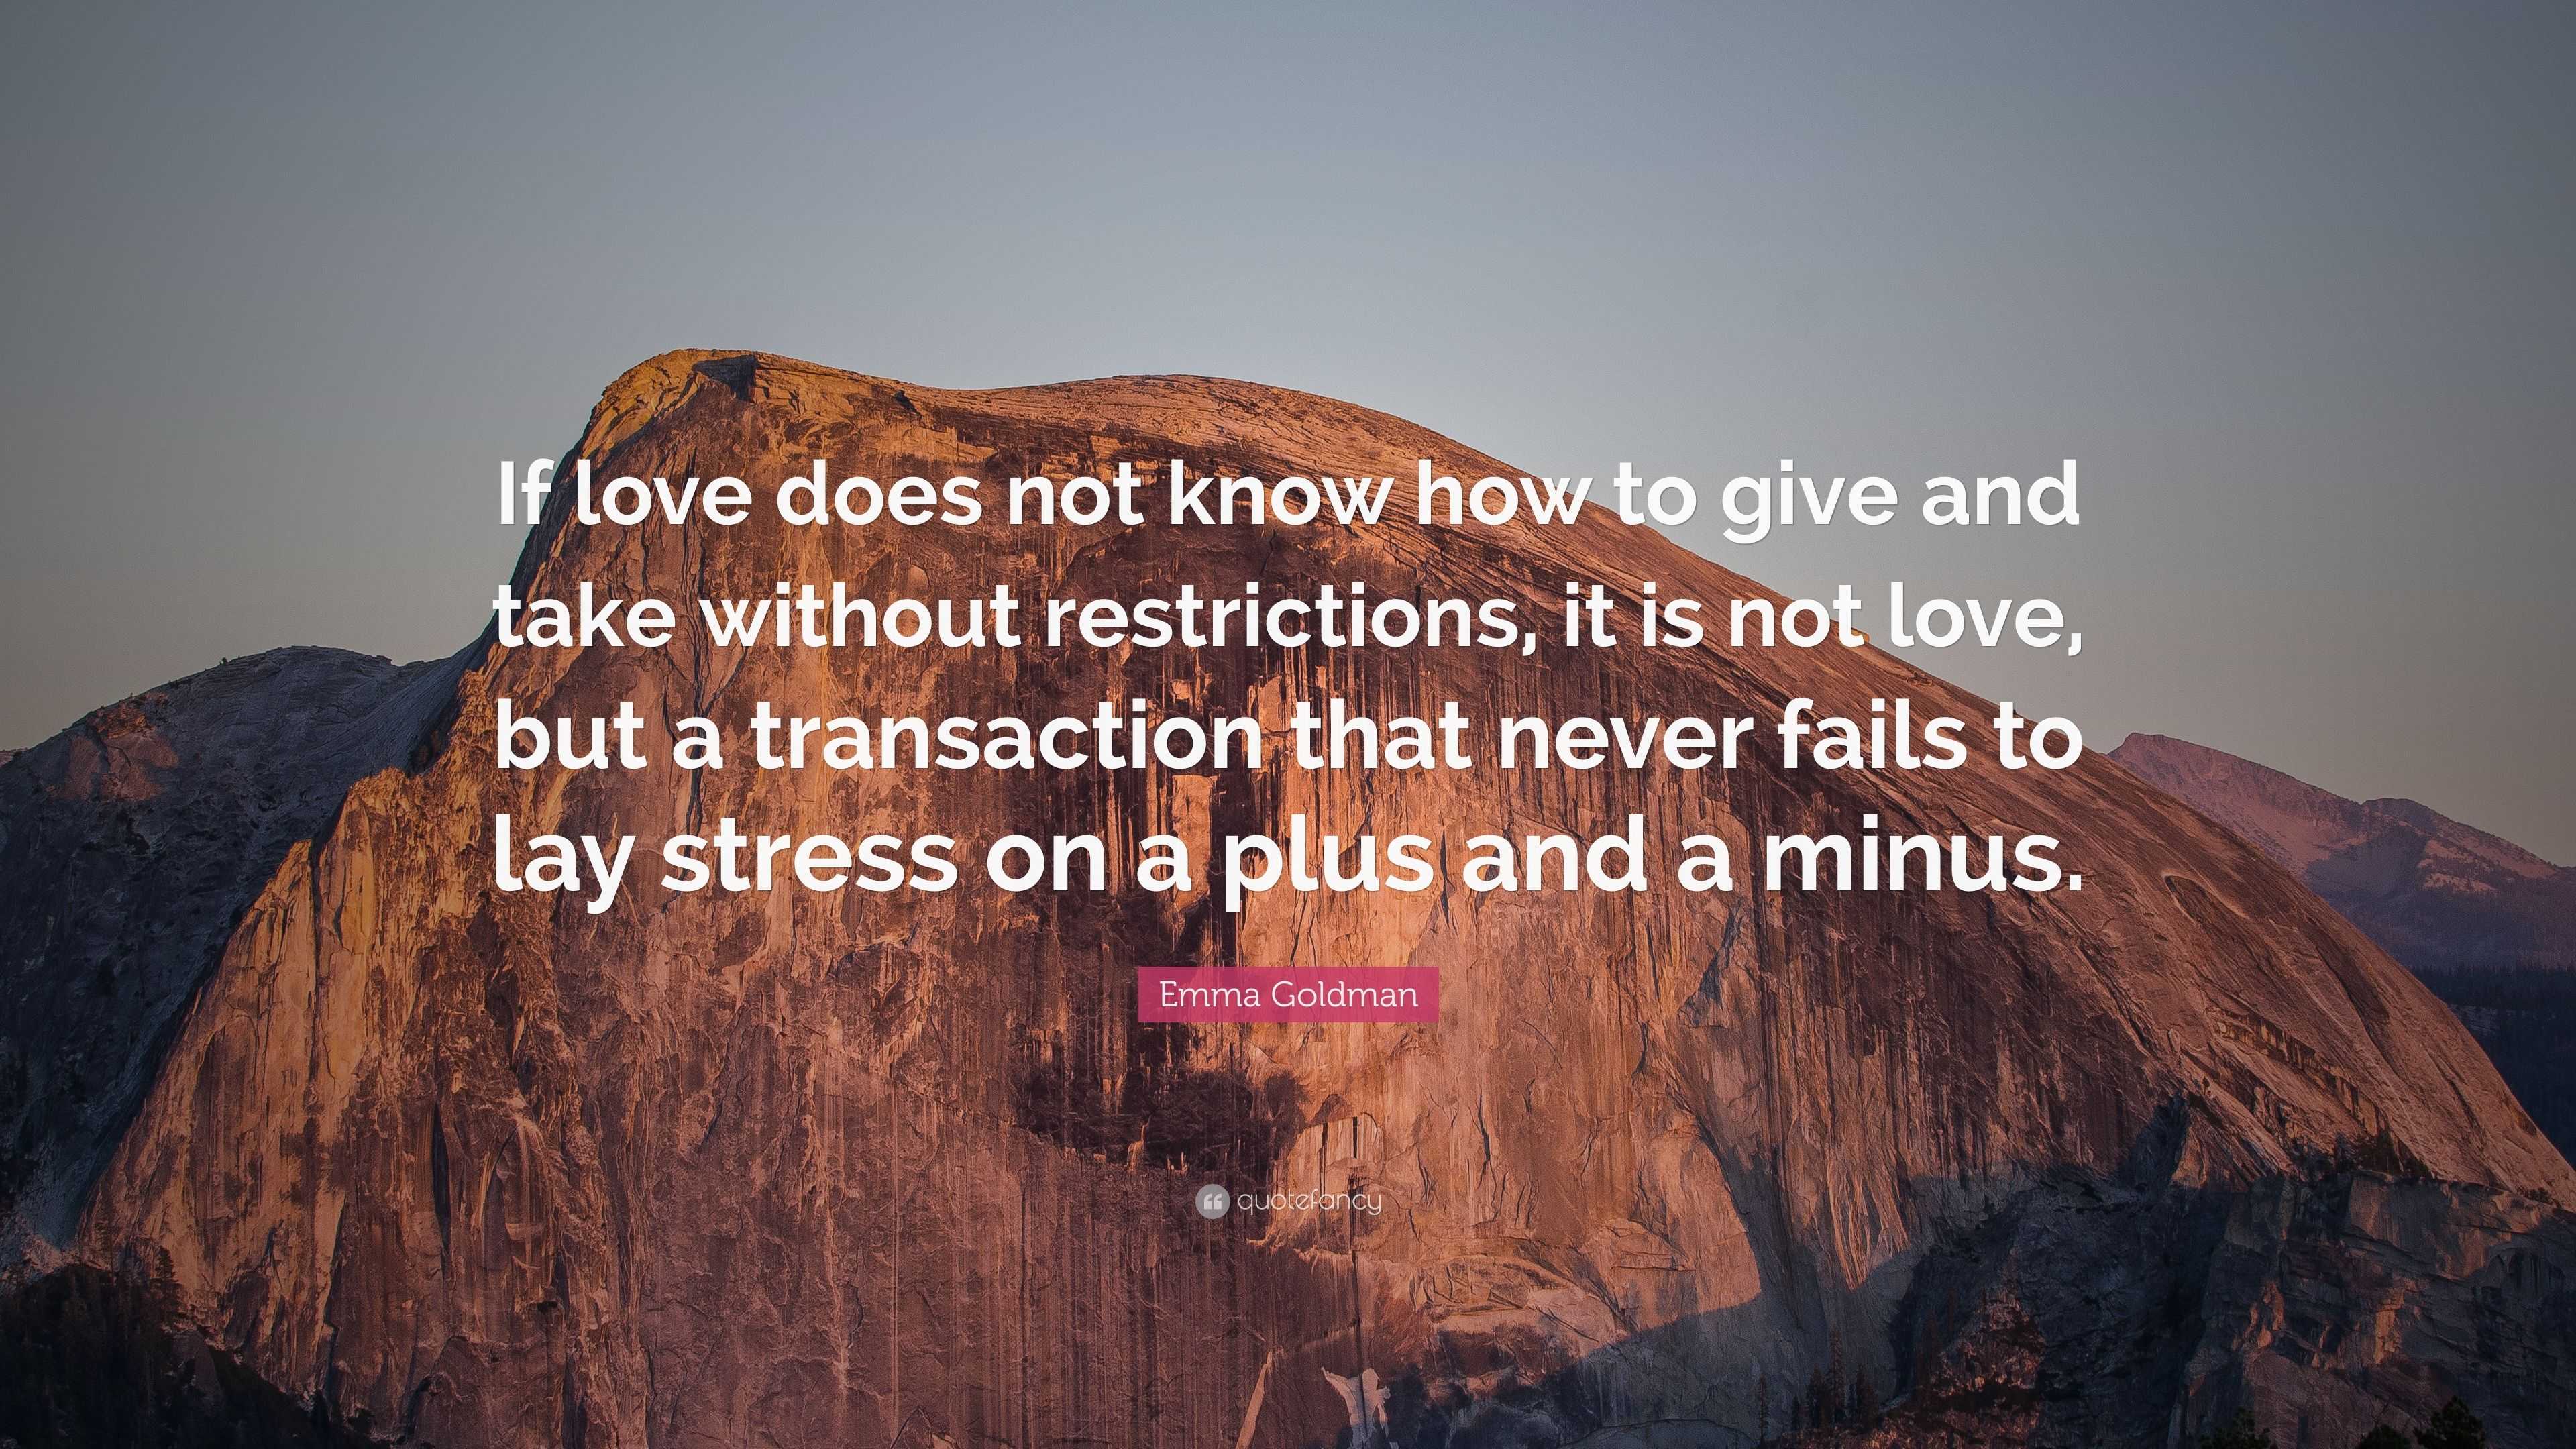 Emma Goldman Quote: “If love does not know how to give and take without  restrictions, it is not love, but a transaction that never fails to l...”